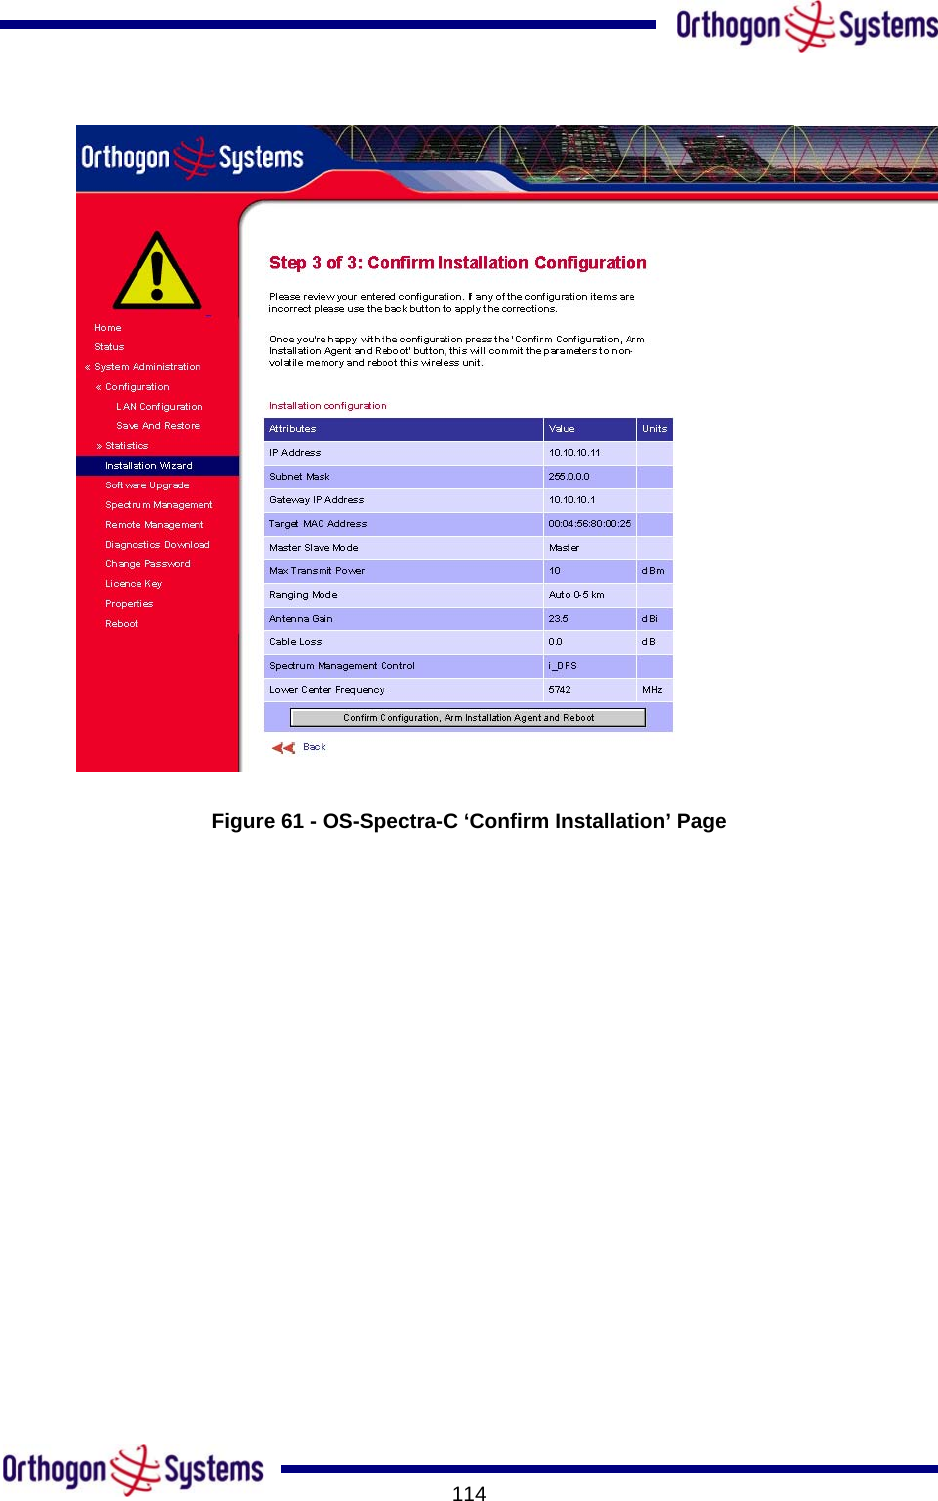       114  Figure 61 - OS-Spectra-C ‘Confirm Installation’ Page 